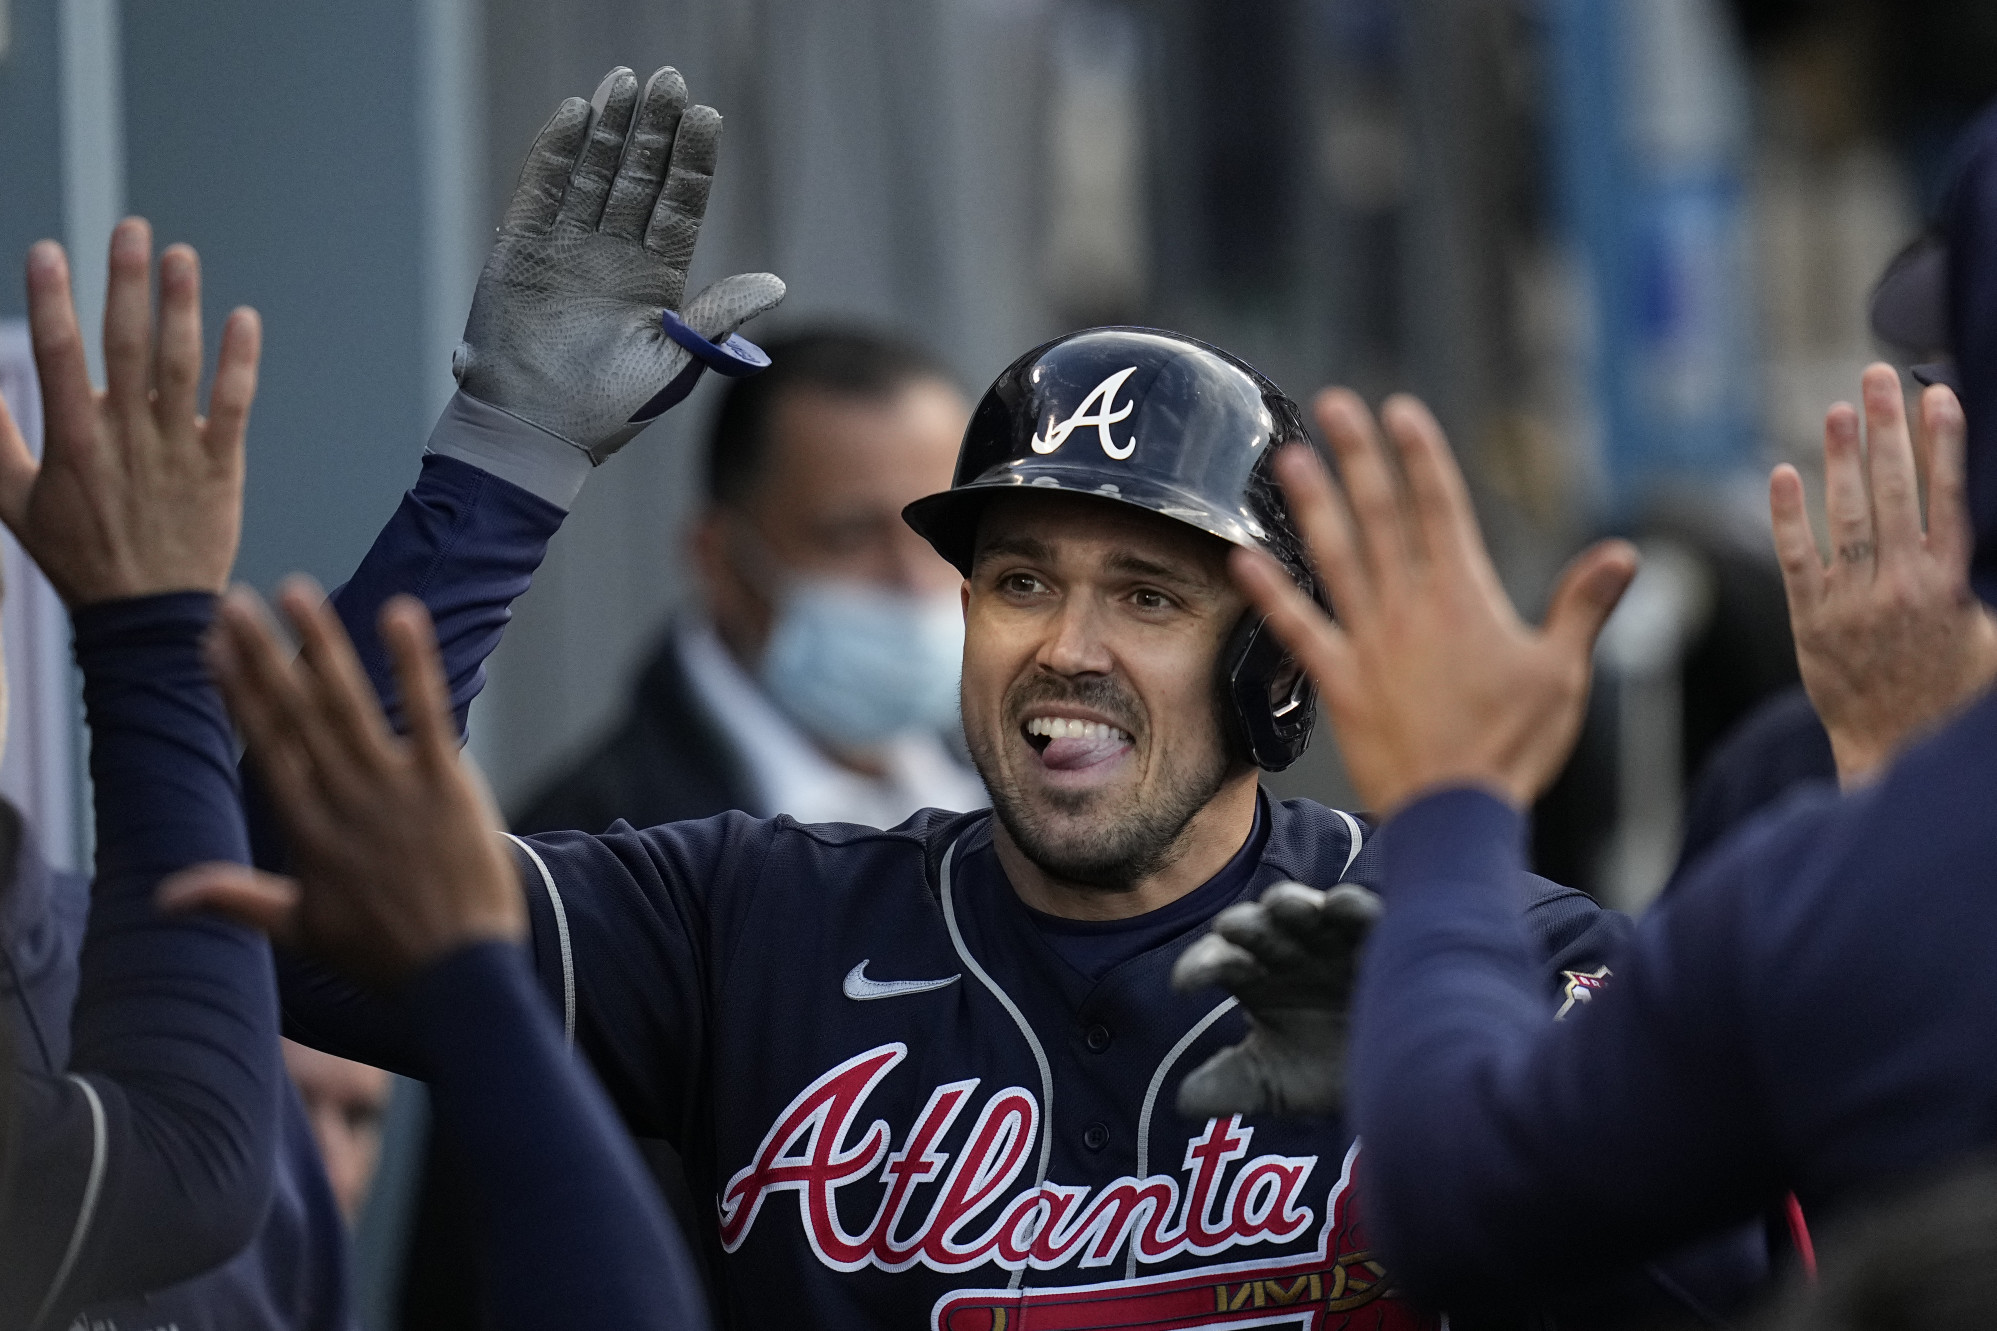 World Series: Braves win for 3-1 lead